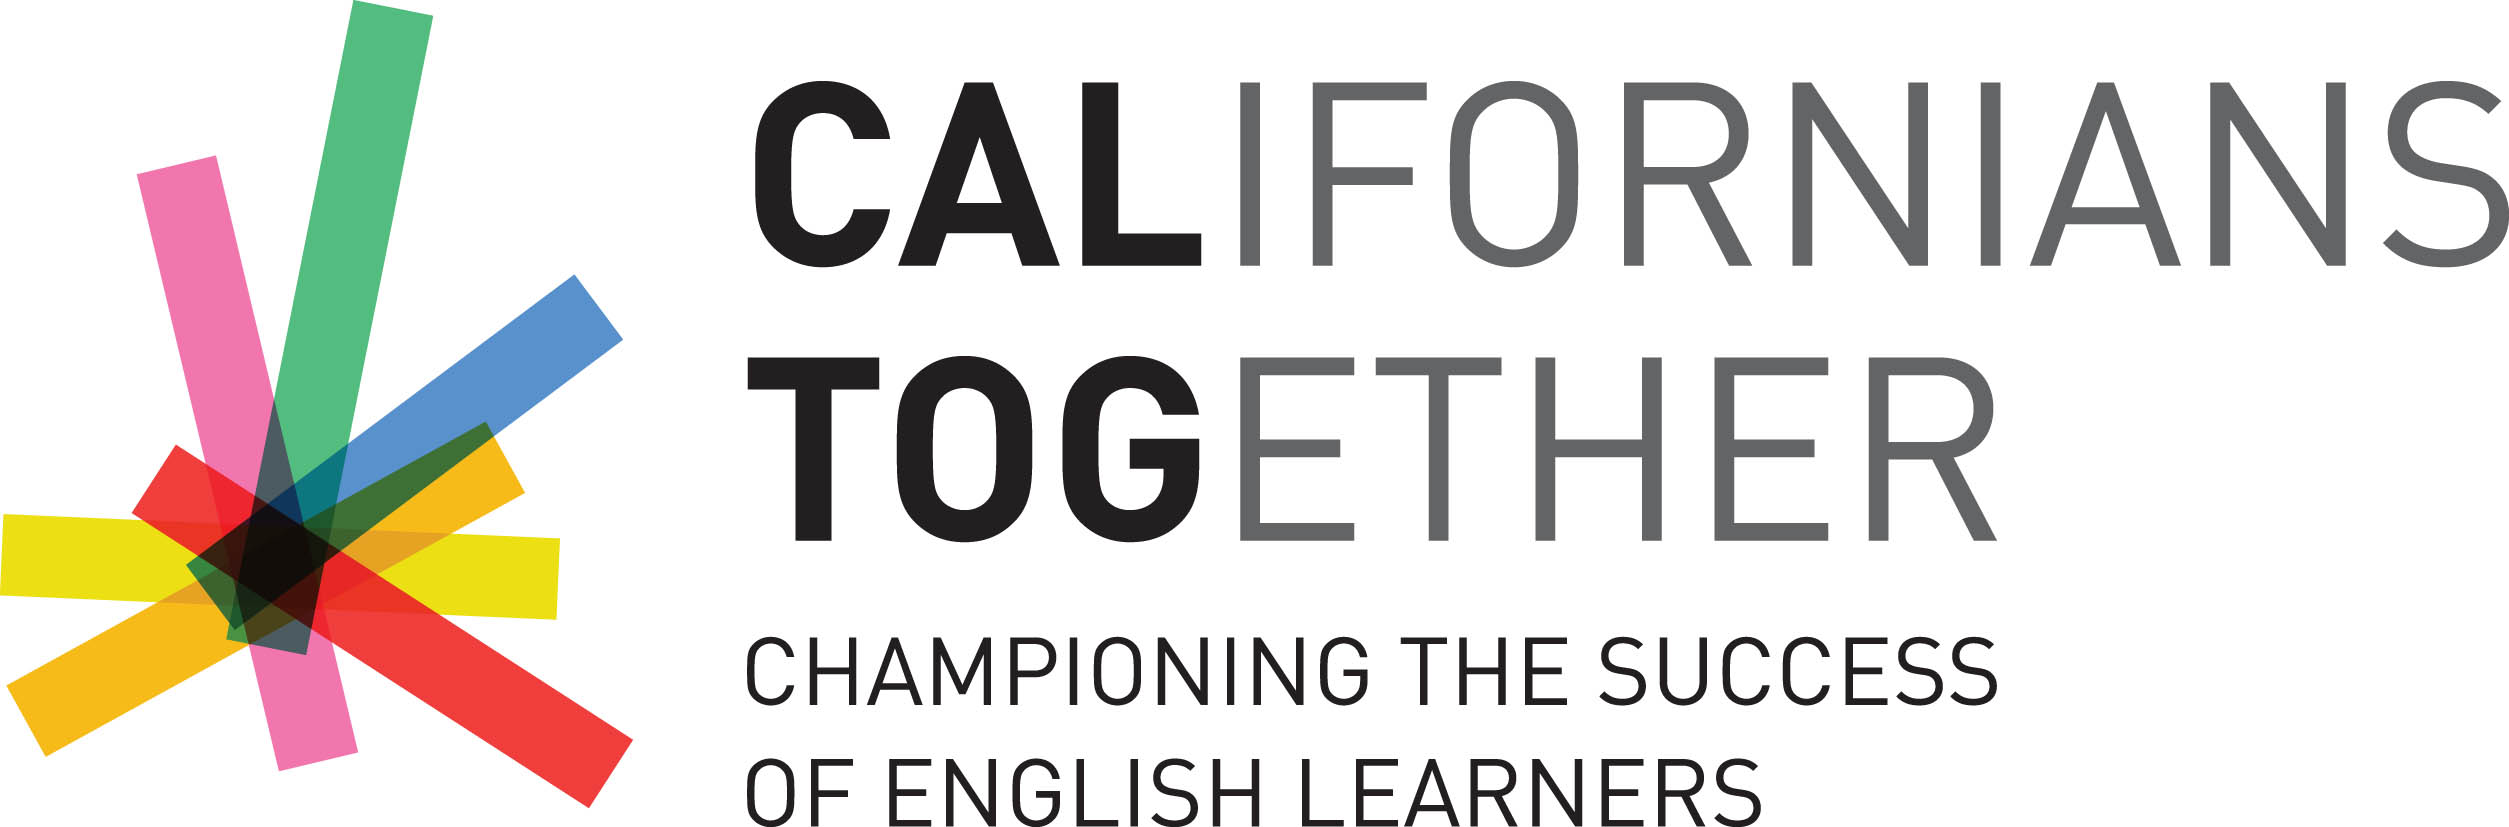 The Dual Language Learner (DLL) Master Plan Advocates Project